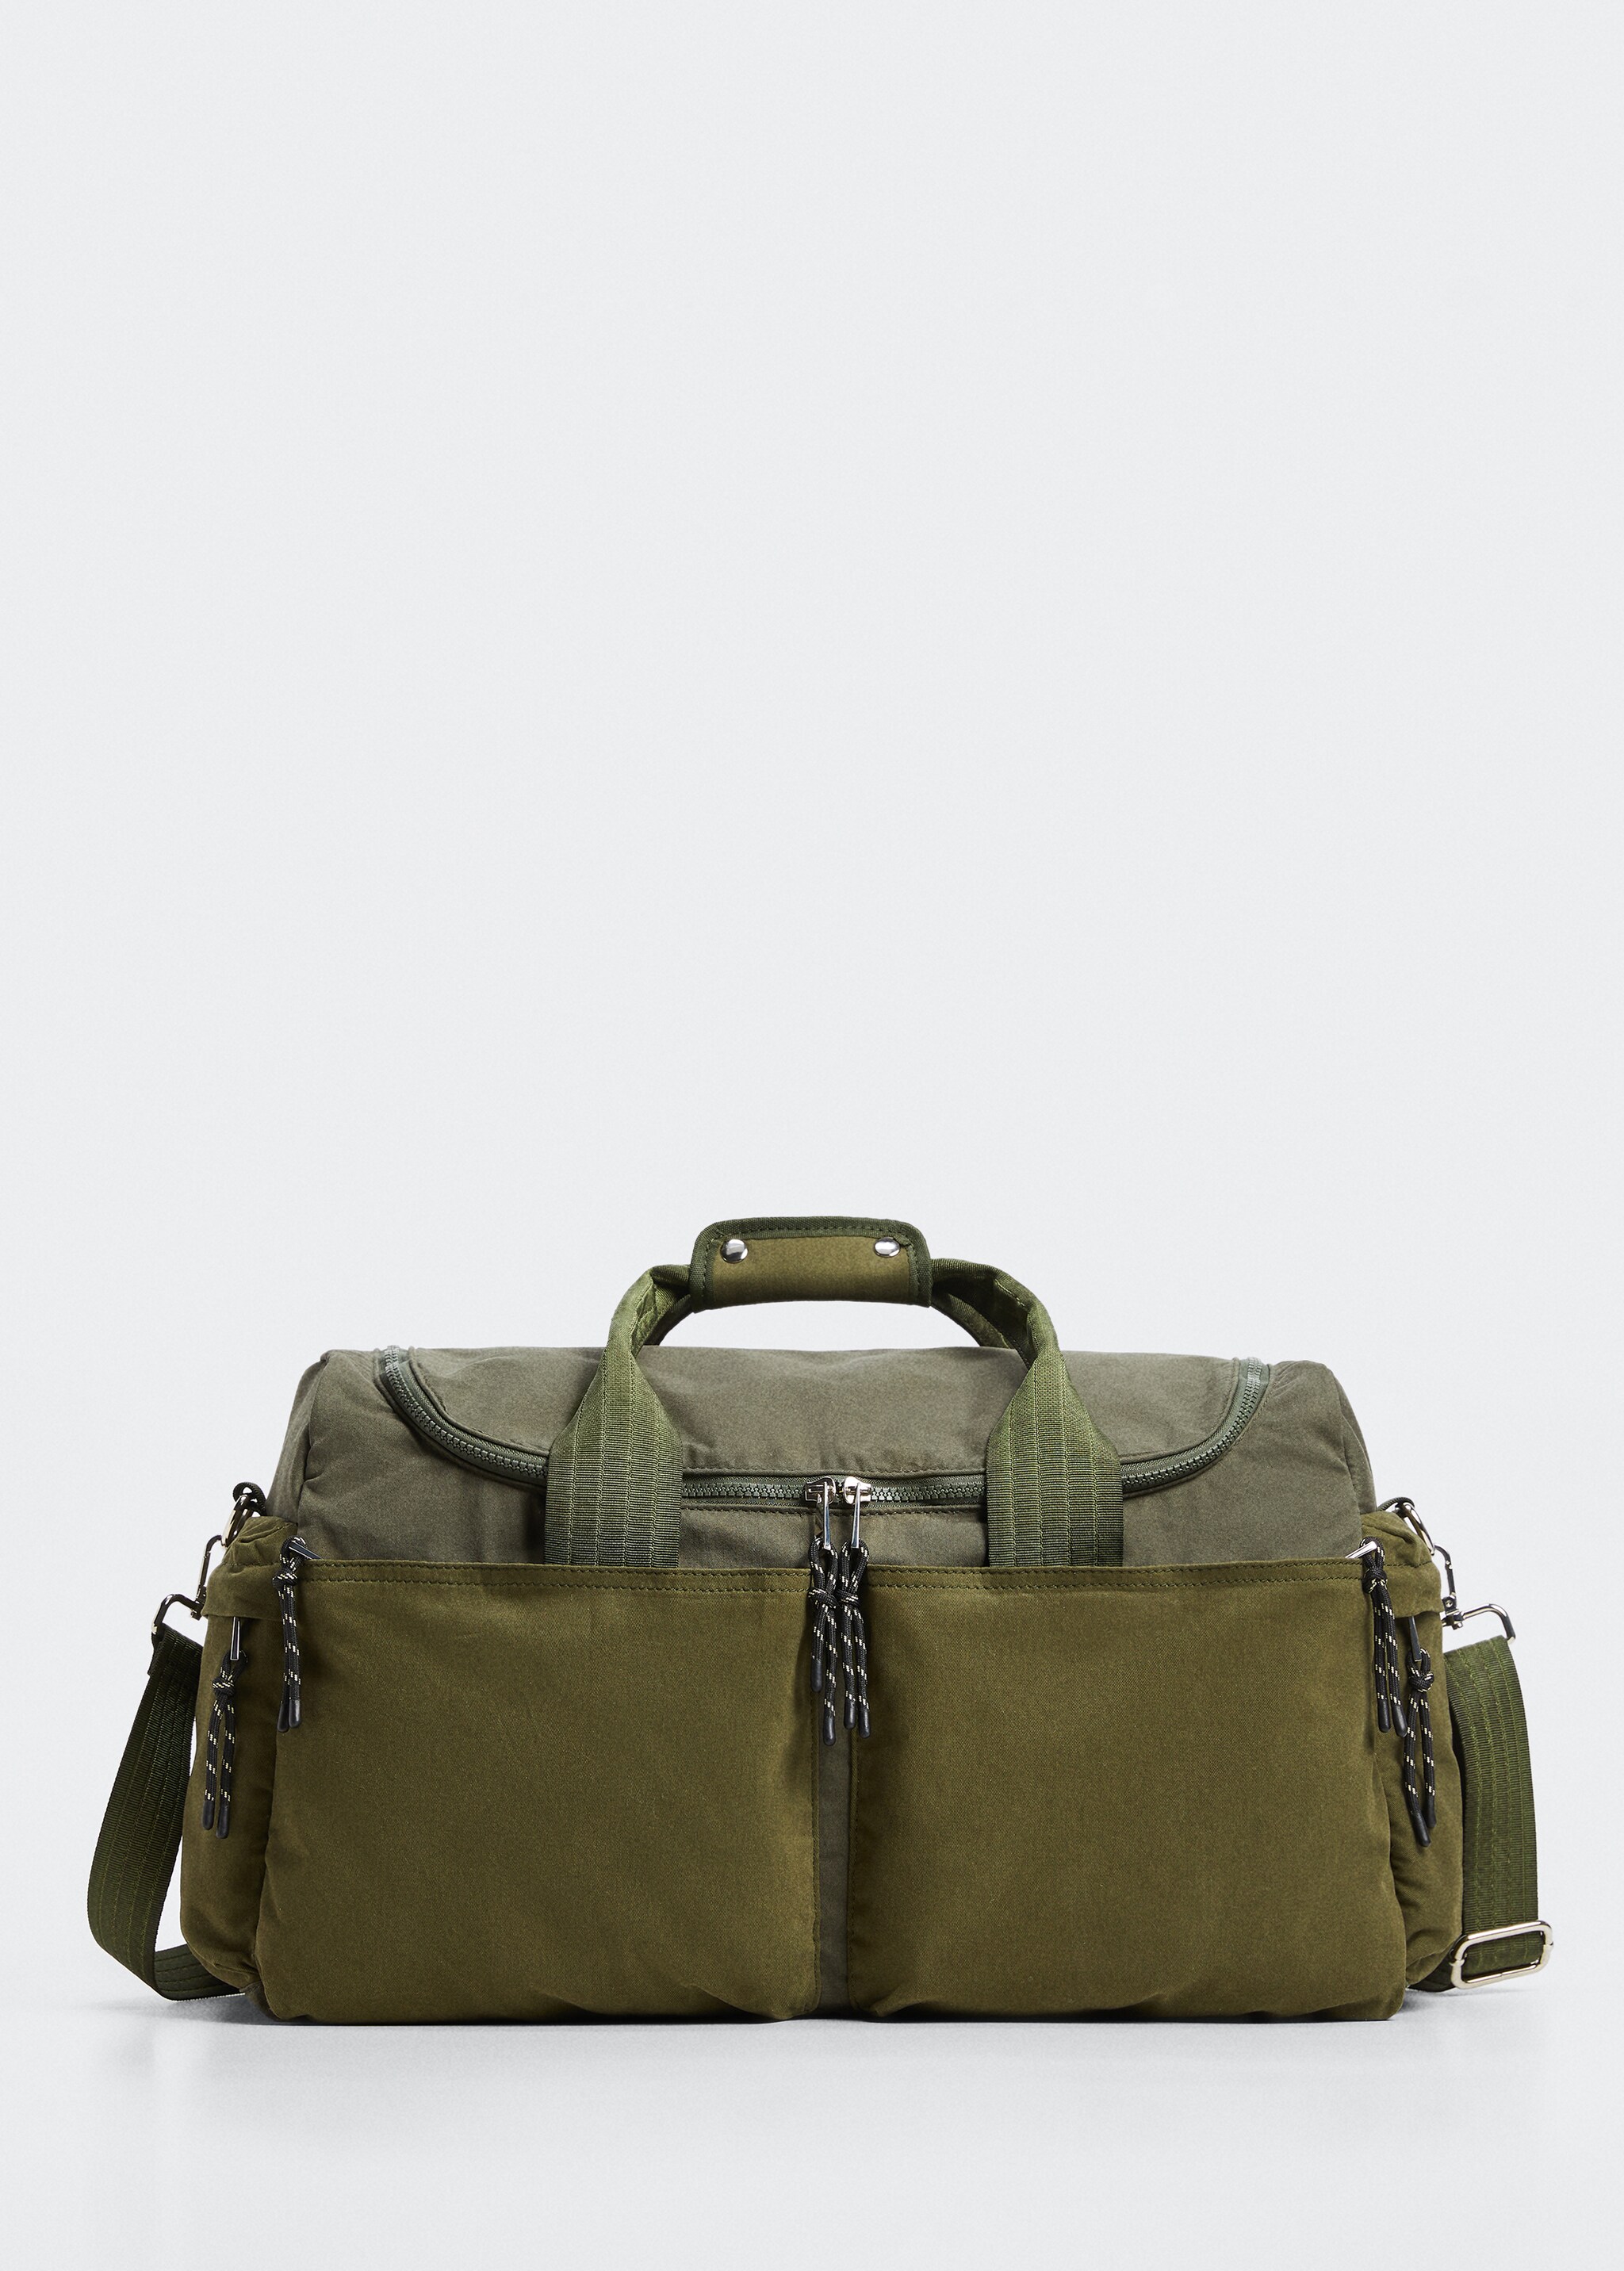 Canvas travel bag - Article without model